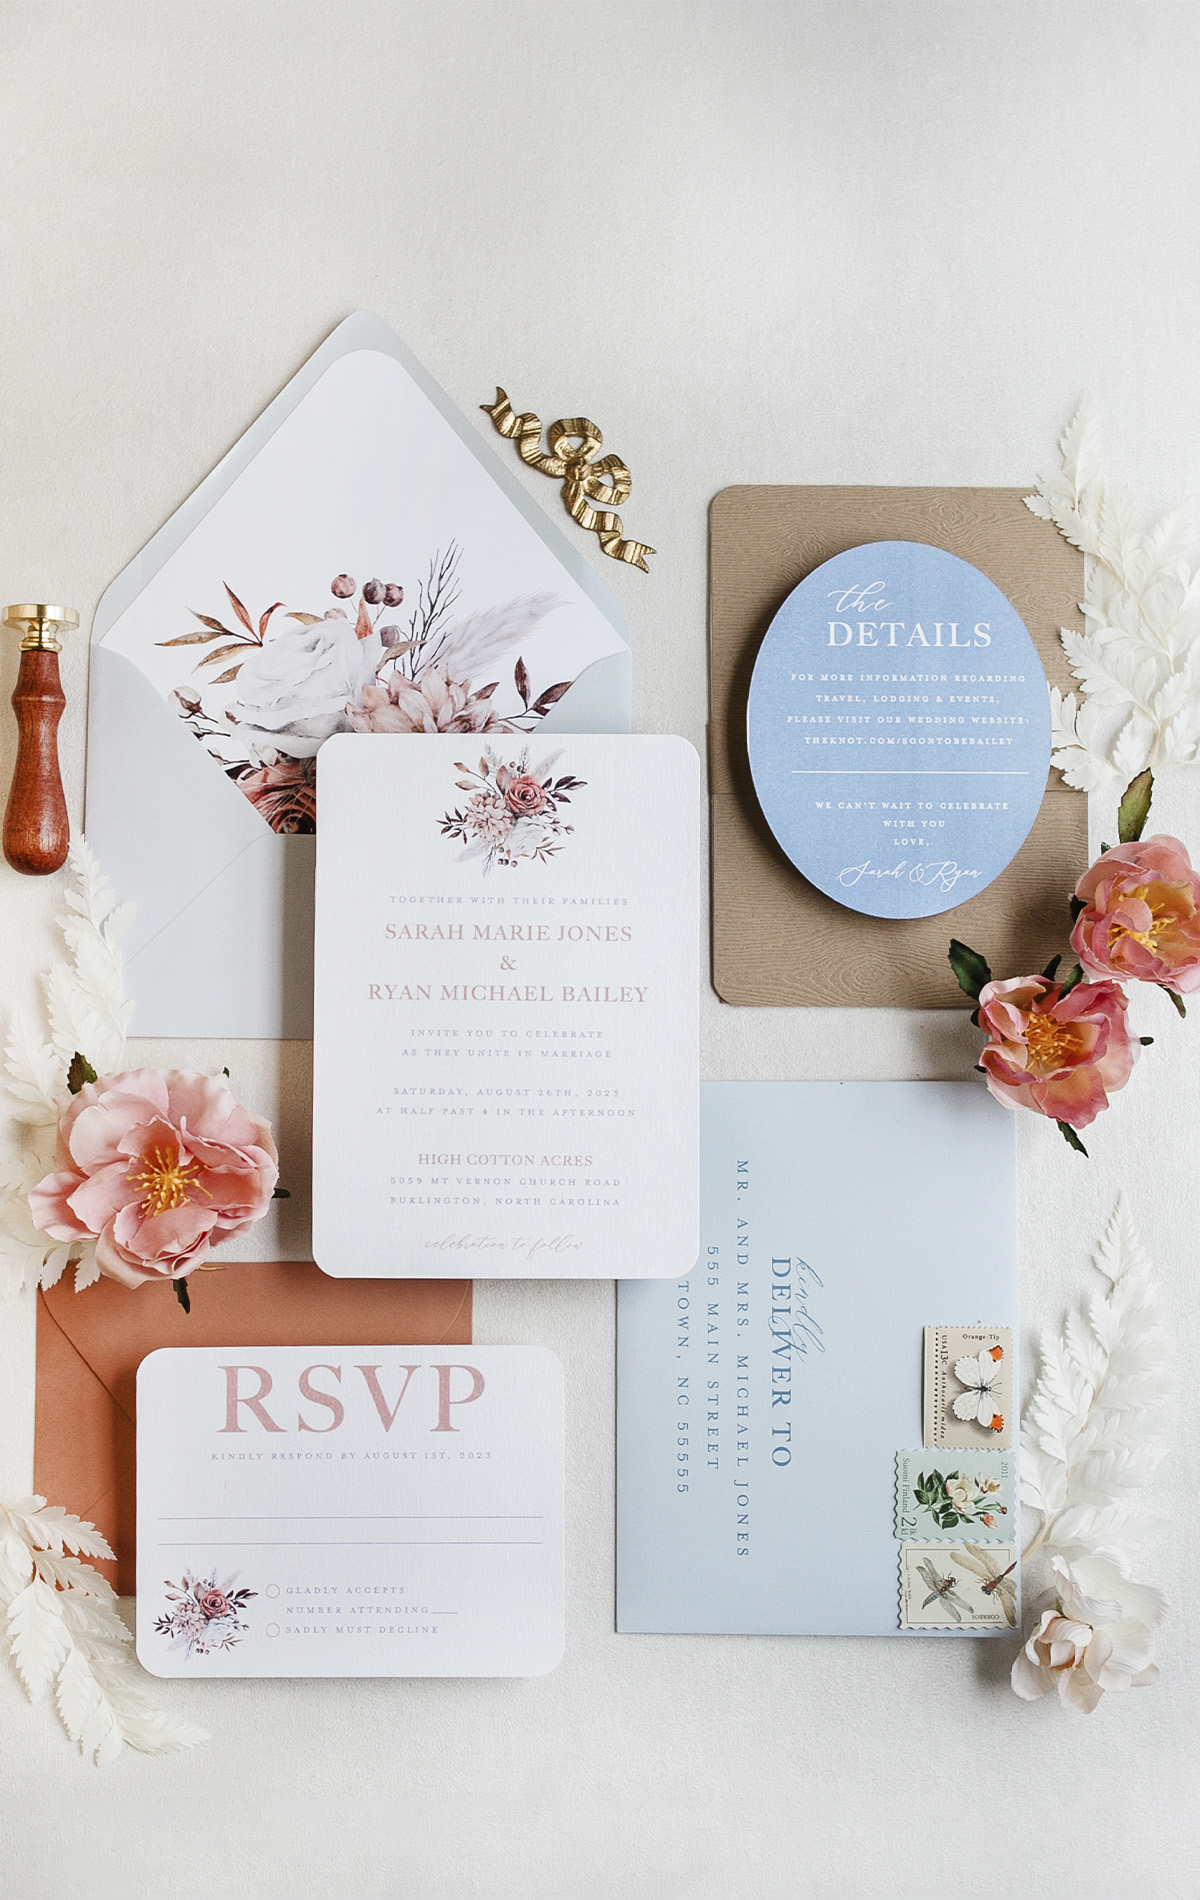 Alexis Scott - Home Website Slider Image - Pink and Peach gloral wedding invitations